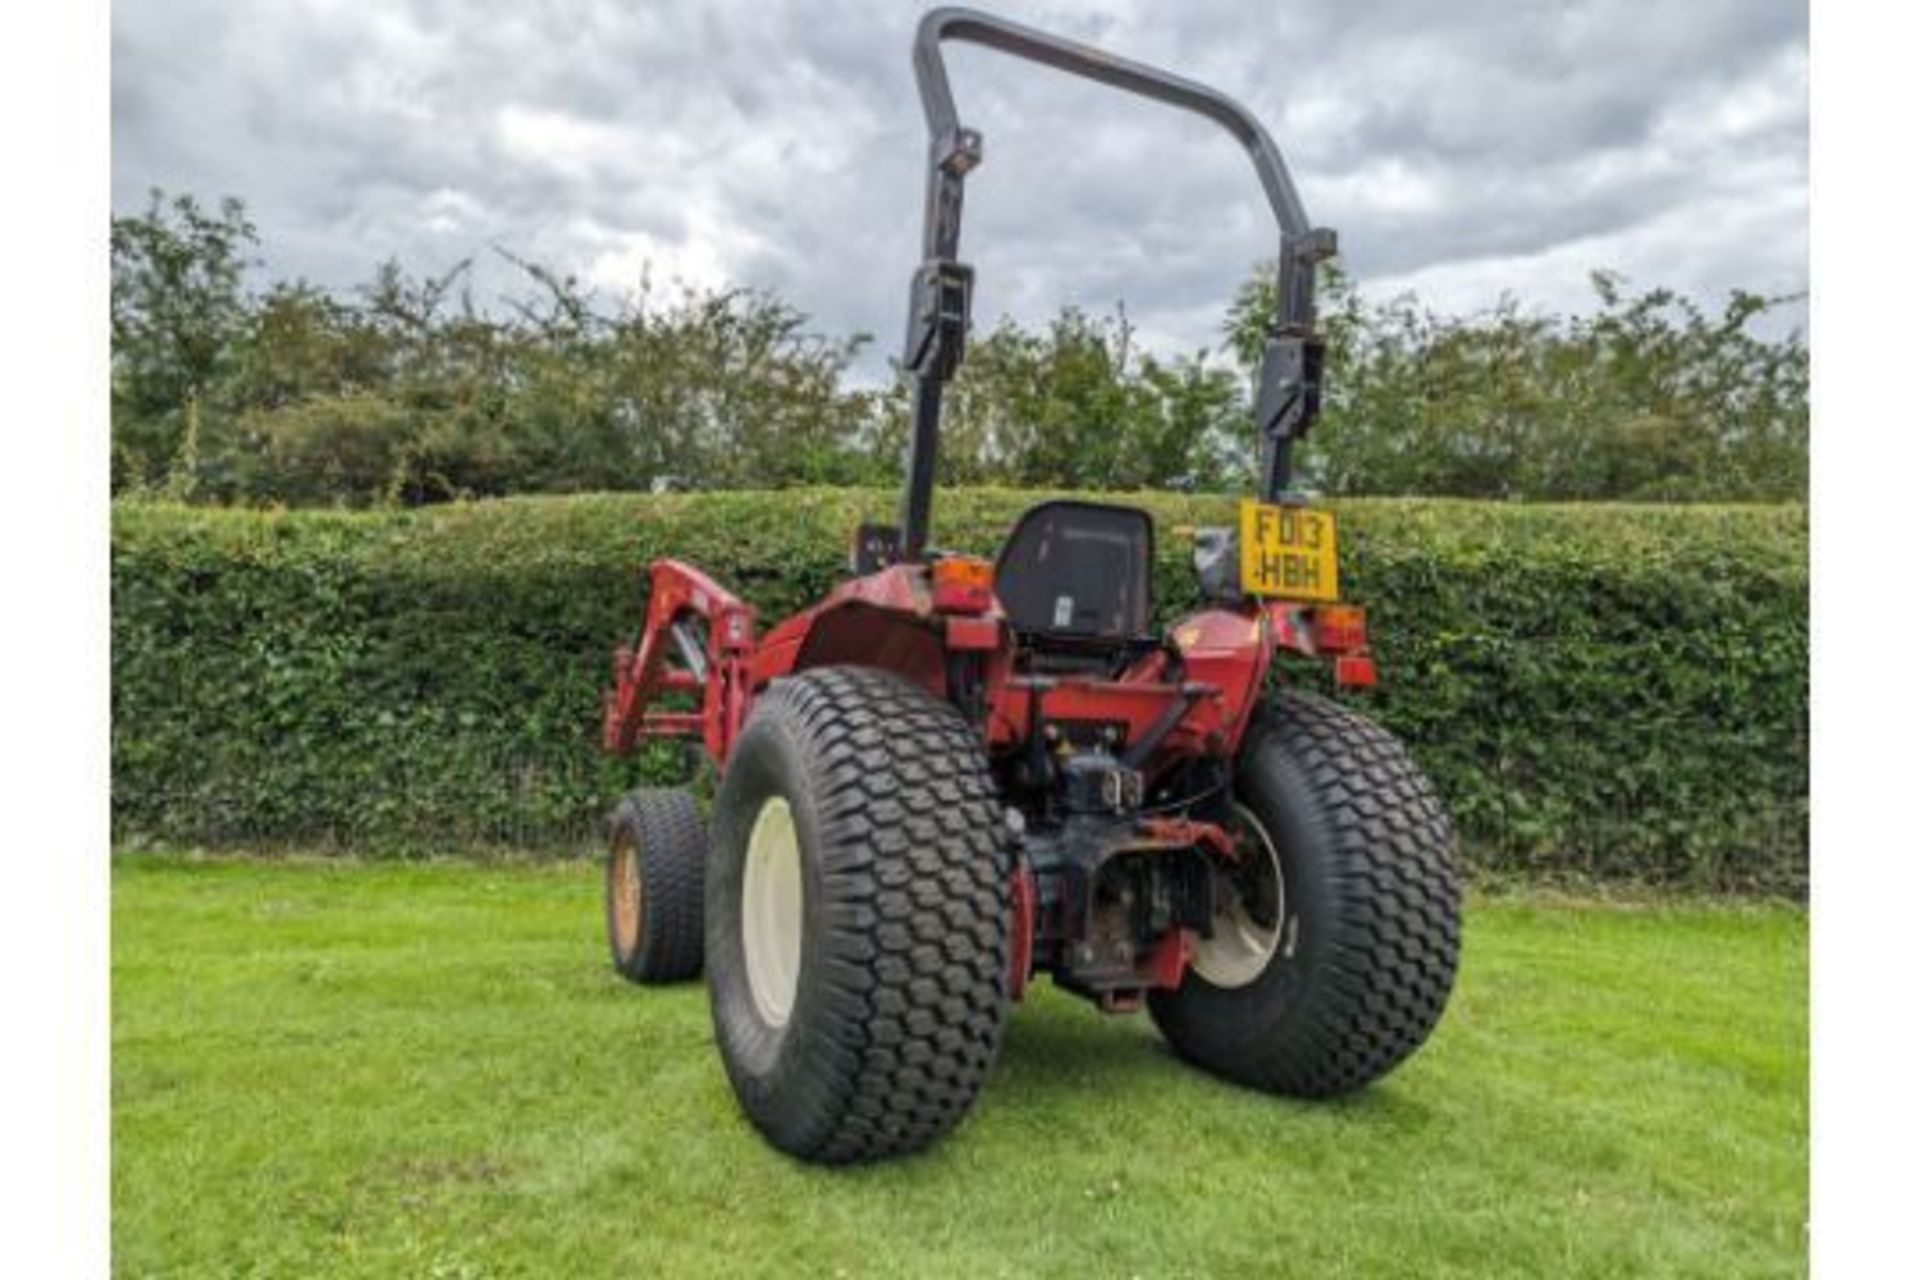 2013 Shibaura ST333 Compact Tractor With Lewis 25QH Loader Attachment 1848 Hours - Image 10 of 11